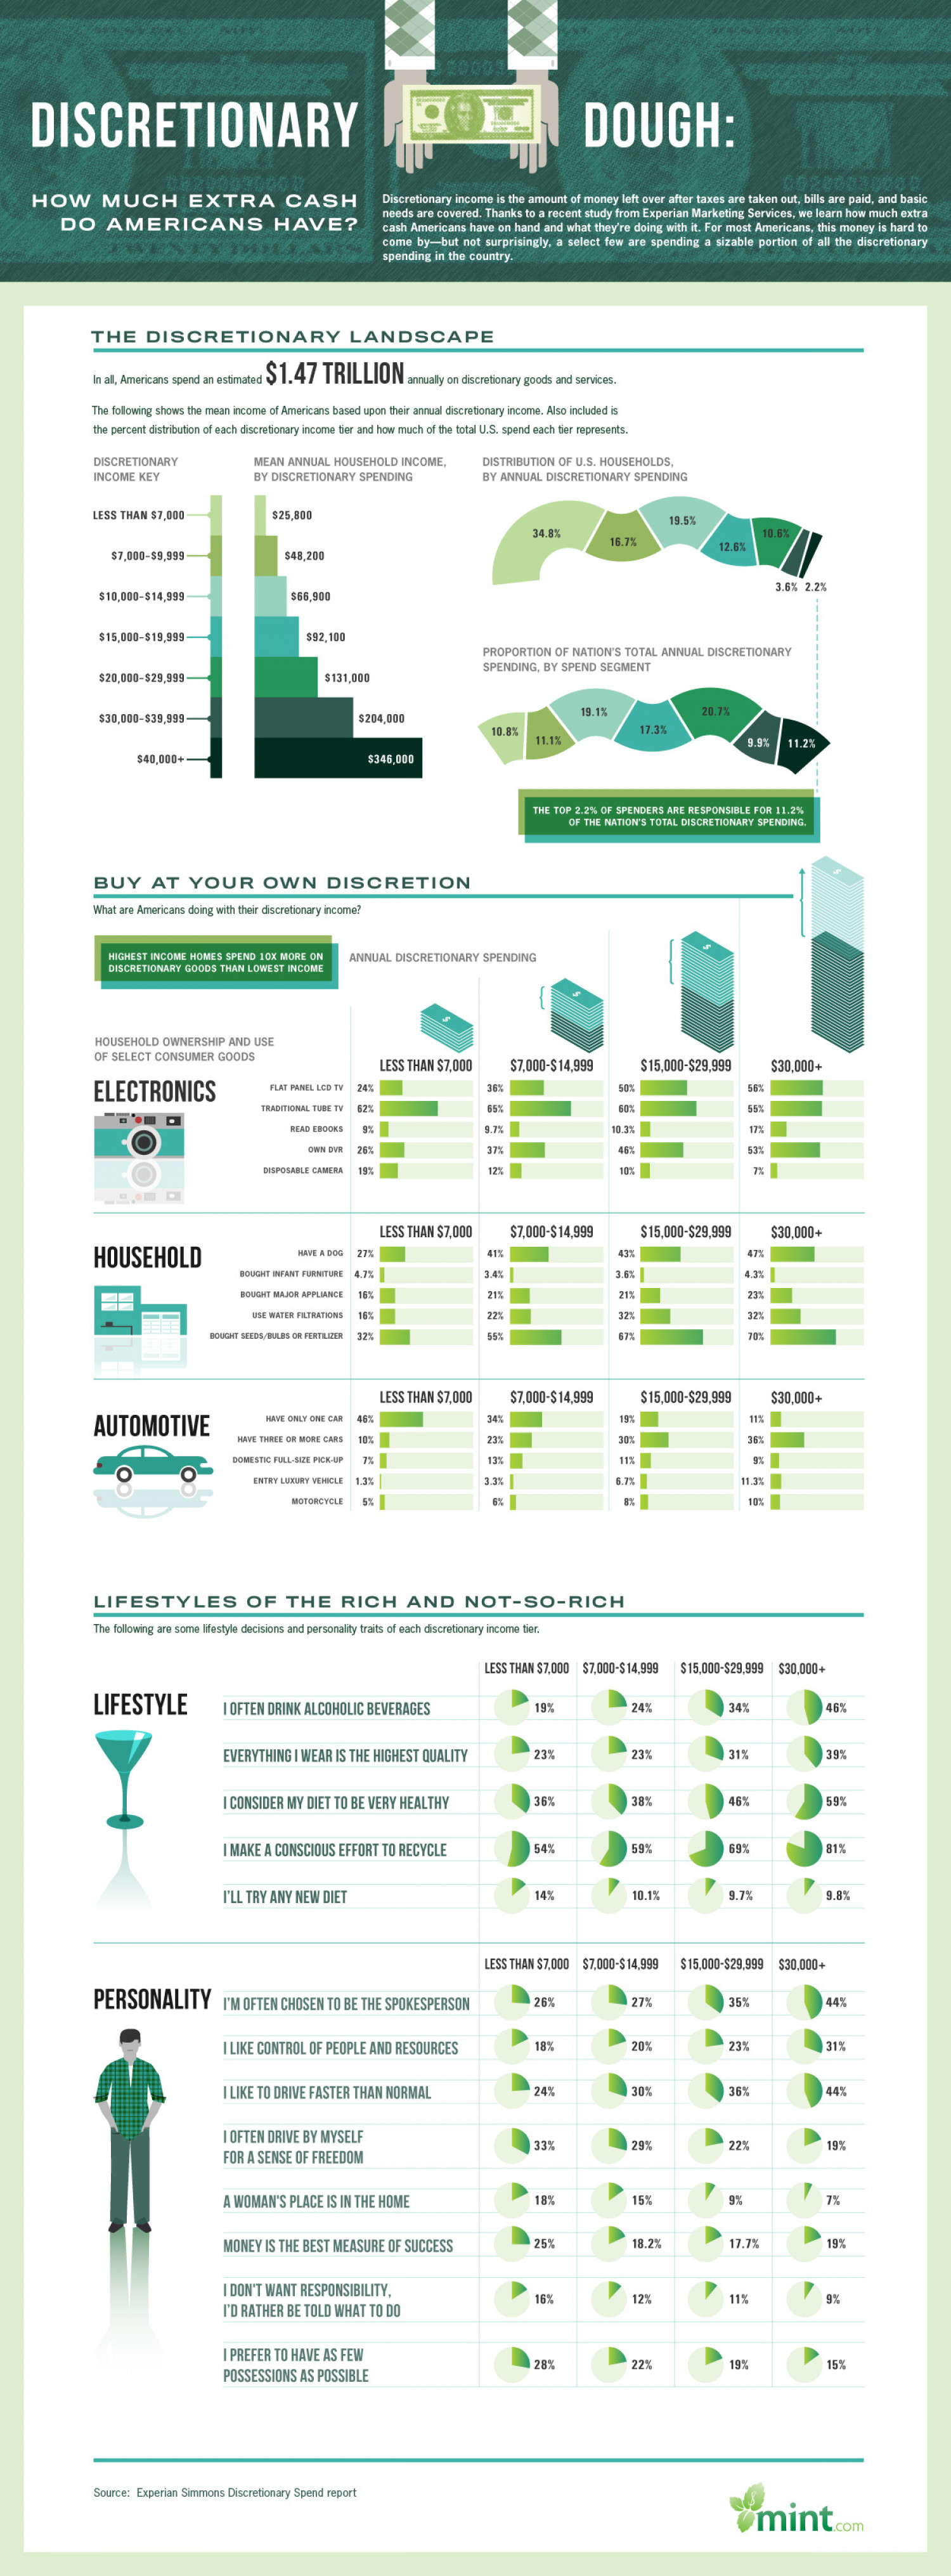 Discretionary Dough: How Much Extra Cash Do American's Have? Infographic